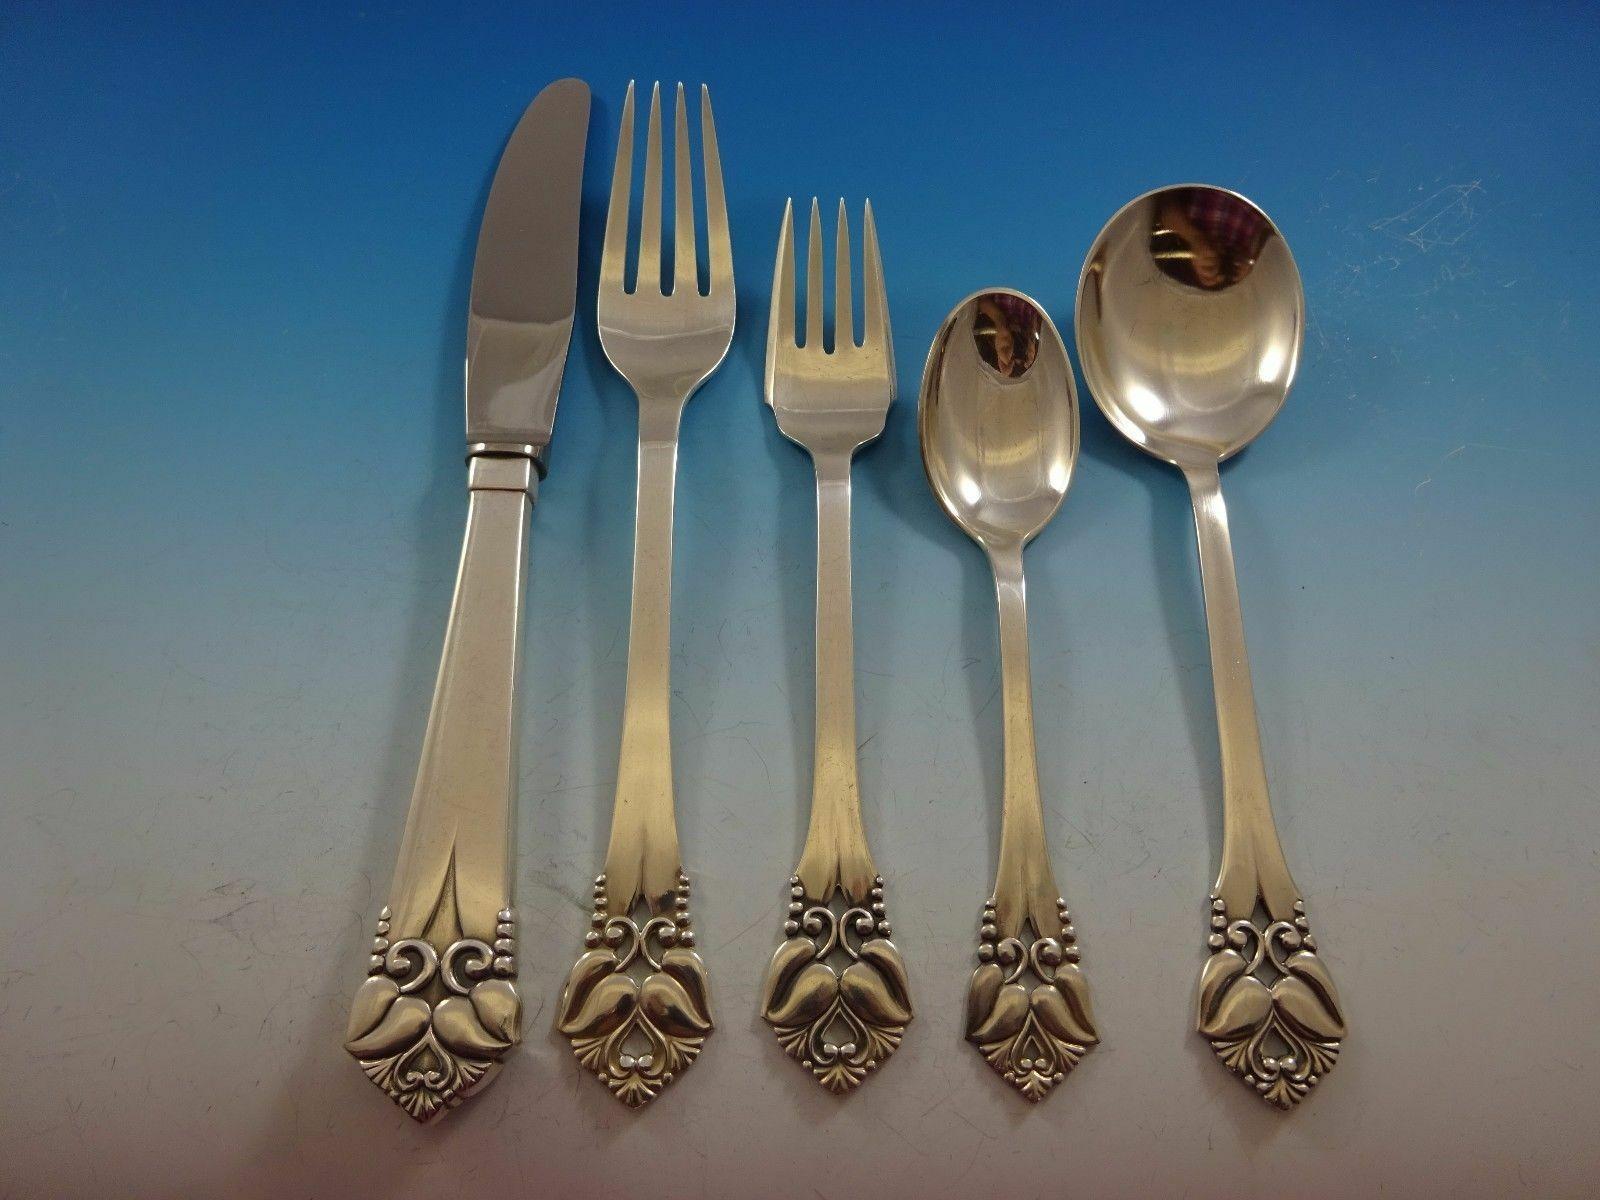 Greta by Orla Vagn Mogensen Danish sterling silver flatware set - 74 pieces. This set includes:

12 knives, long handle, 8 1/2